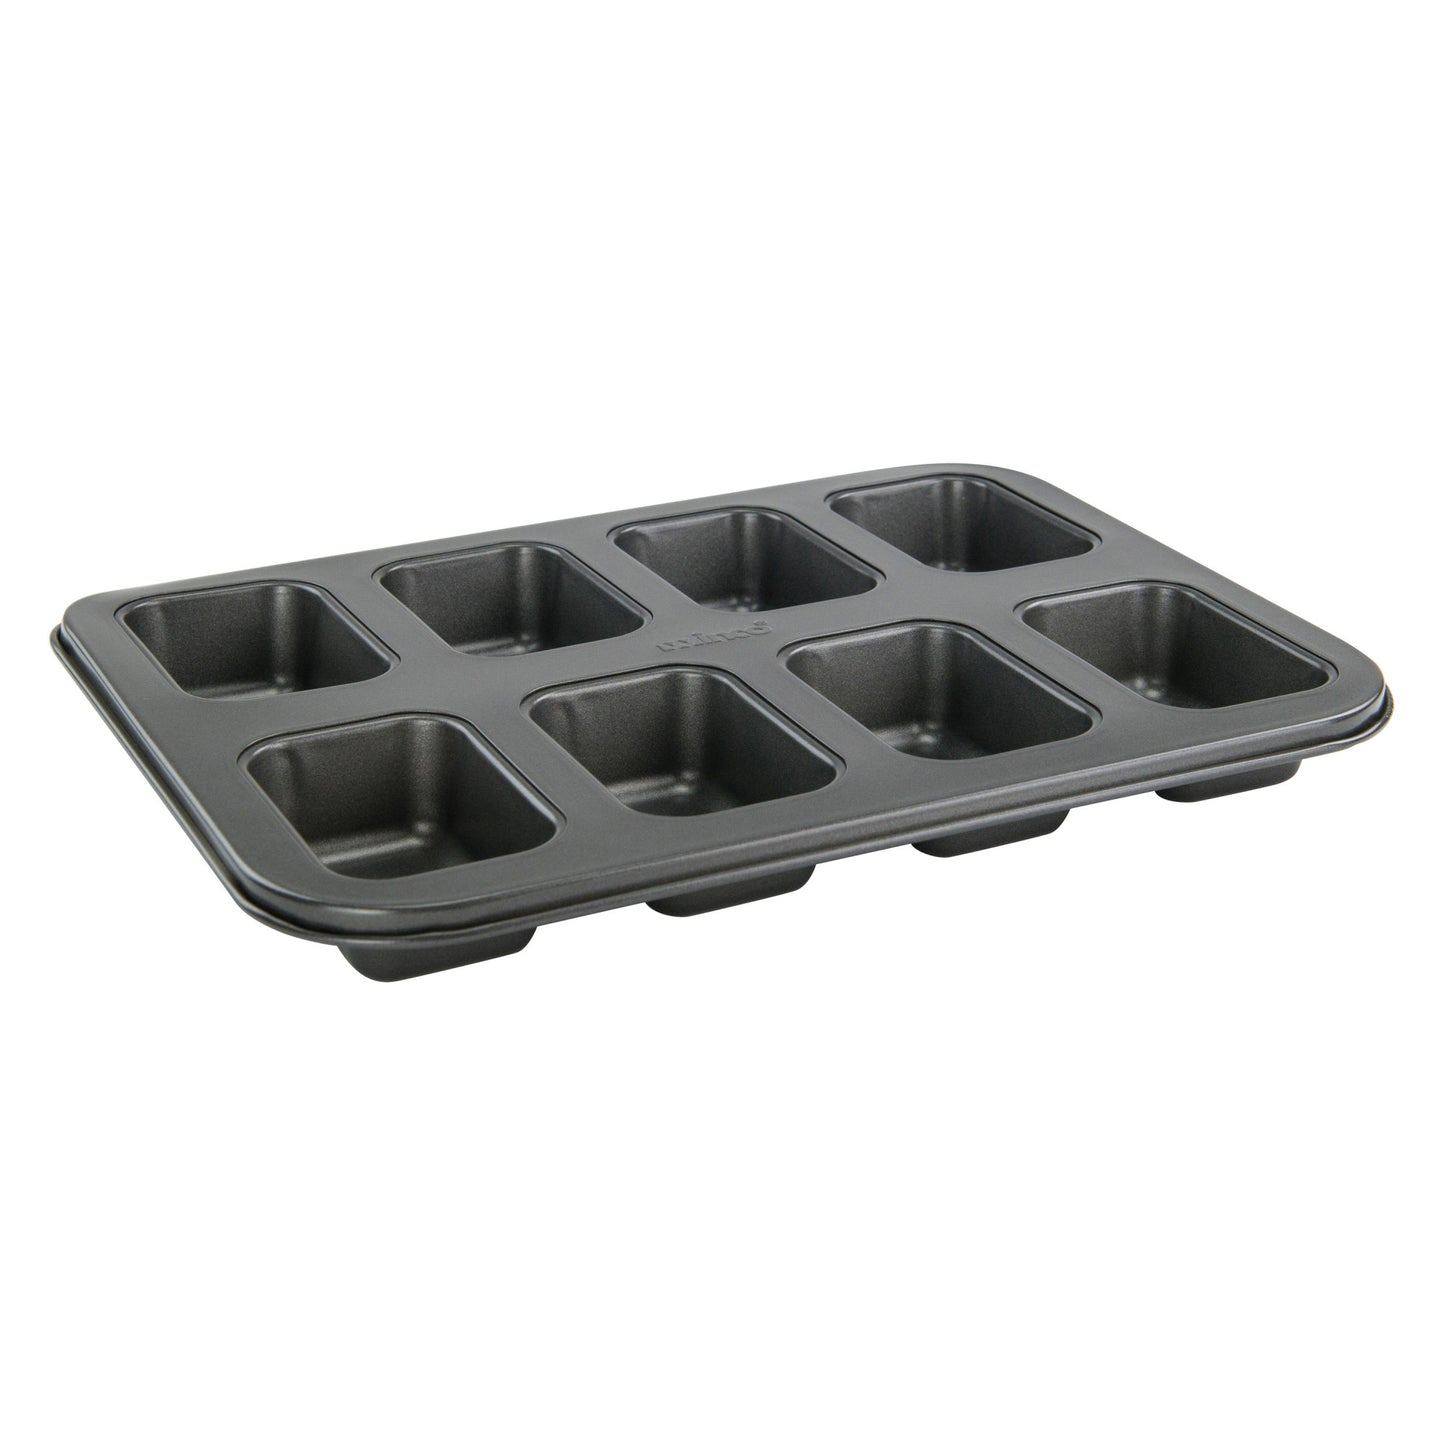 HLF-8MN - 8-Cup Mini Loaf Pan, Non-stick, Carbon Steel